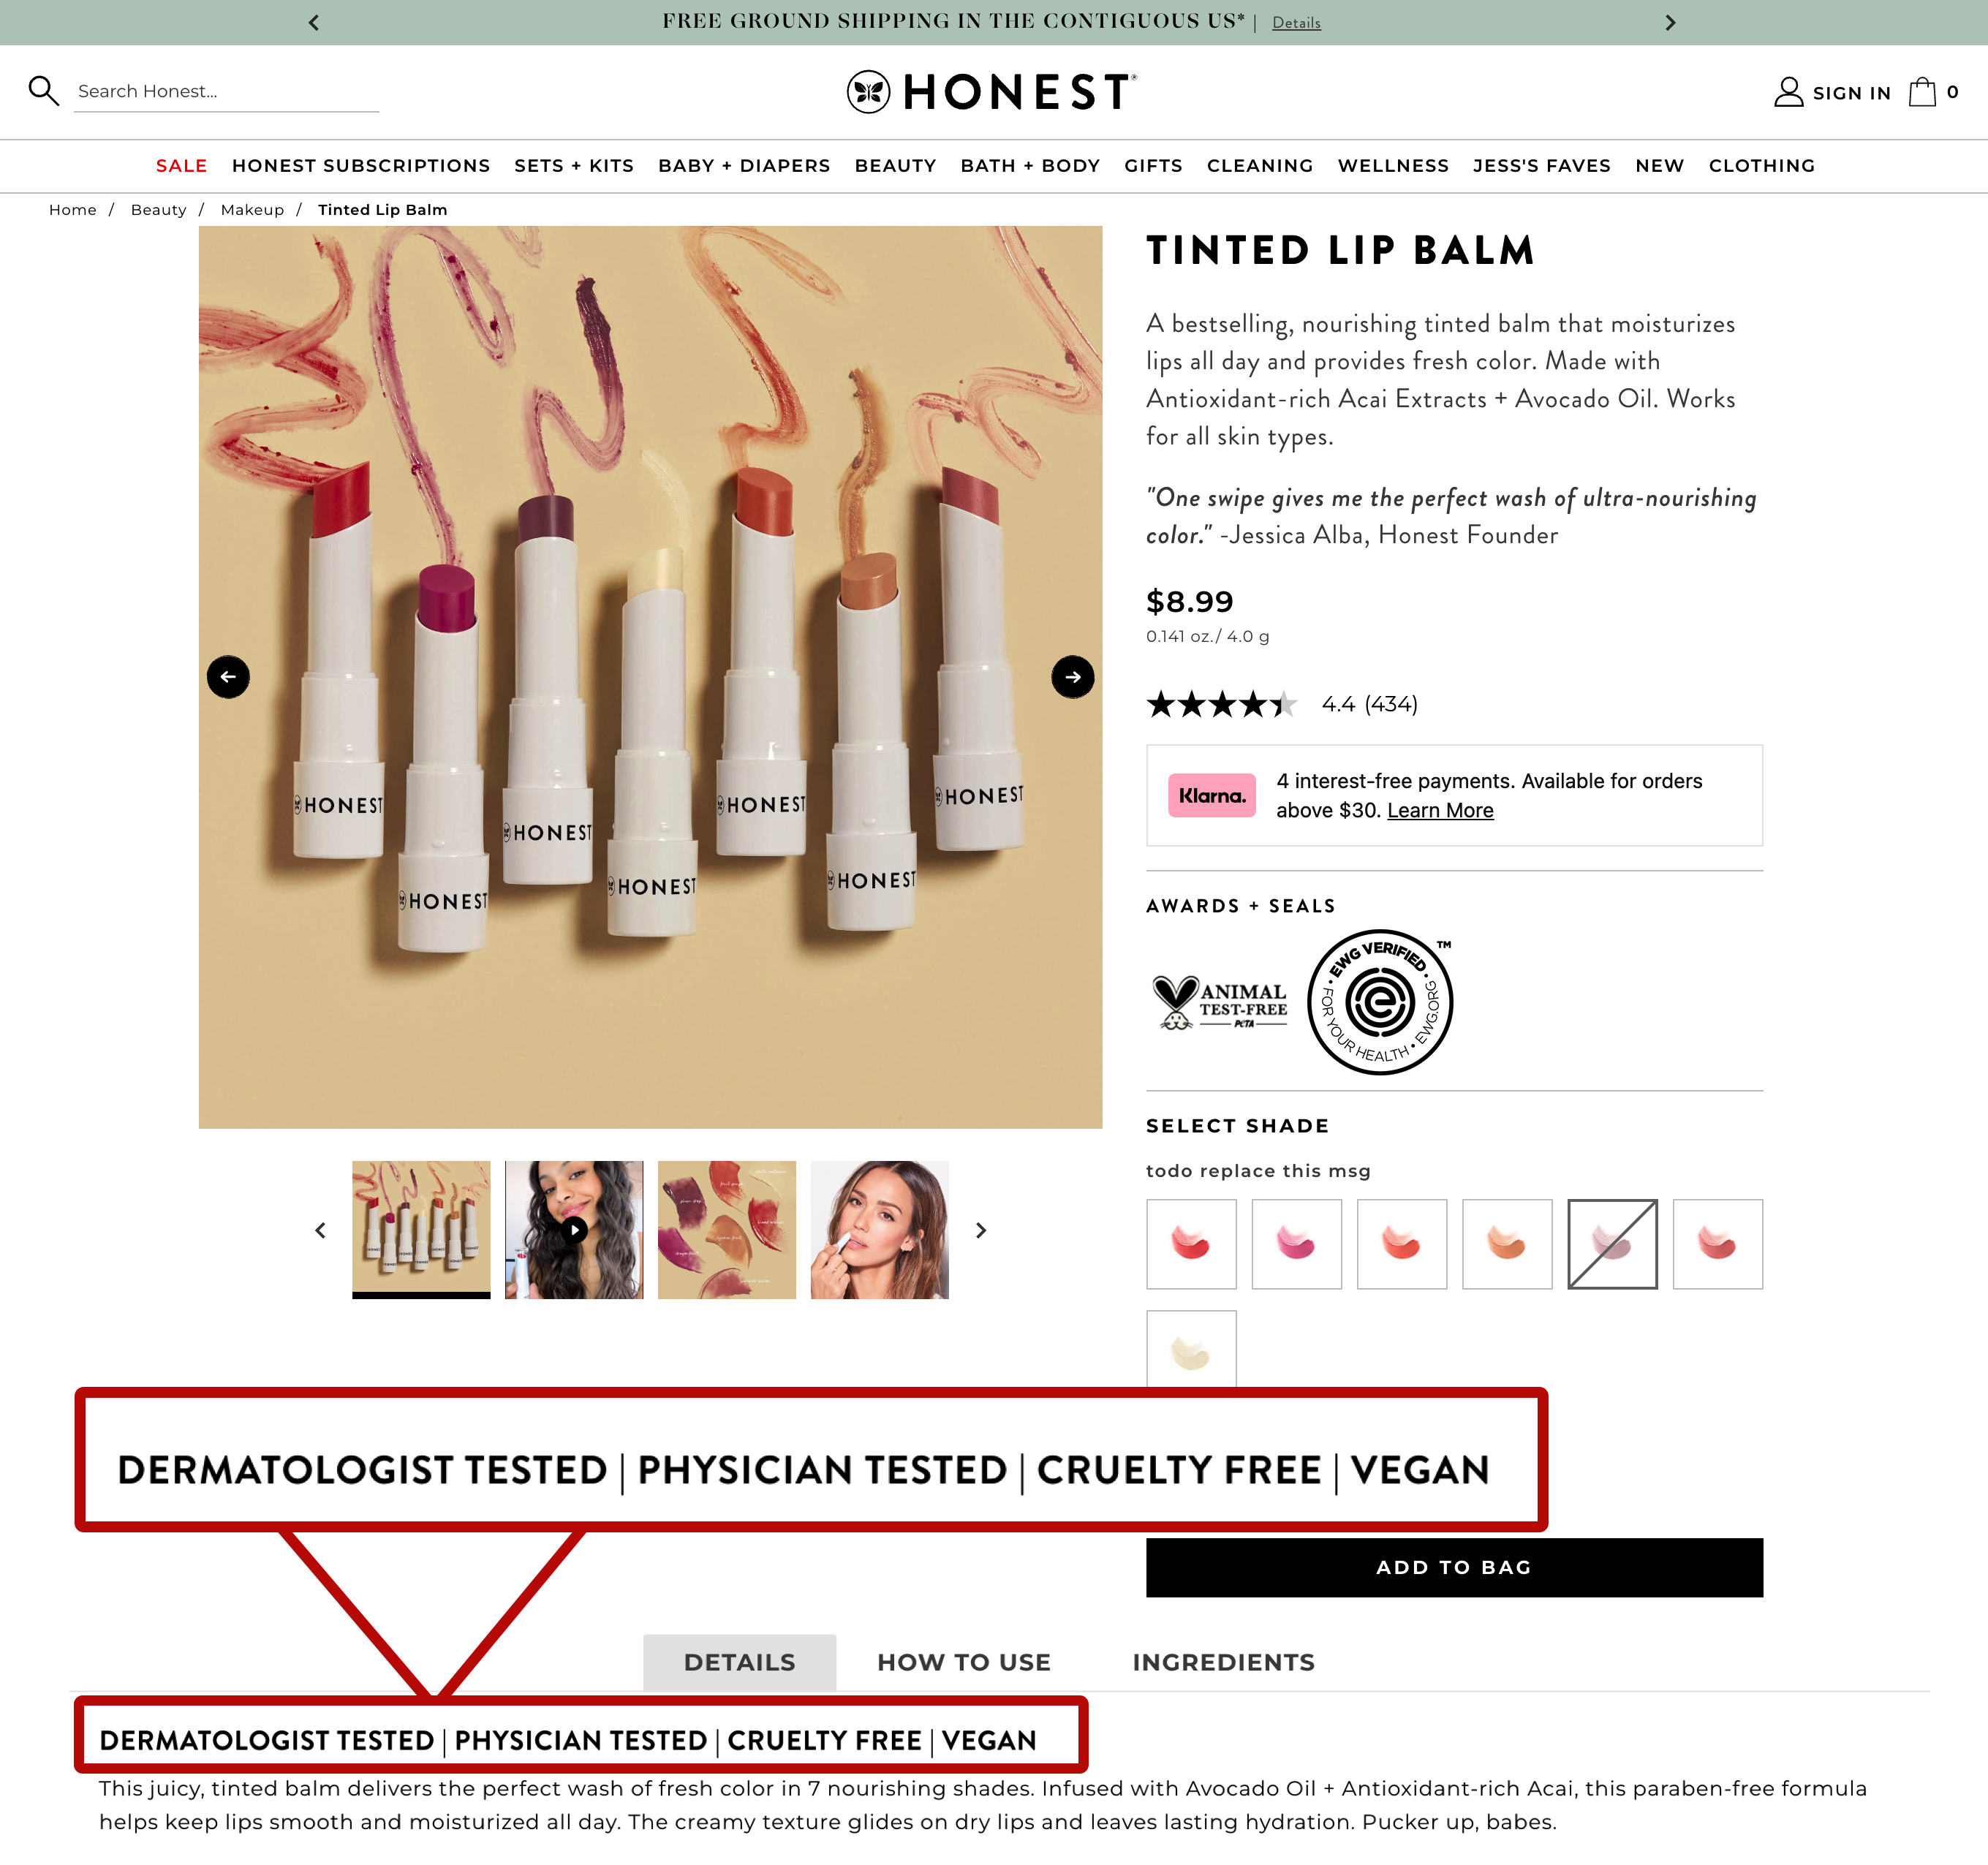 The Honest Company vegan product finder